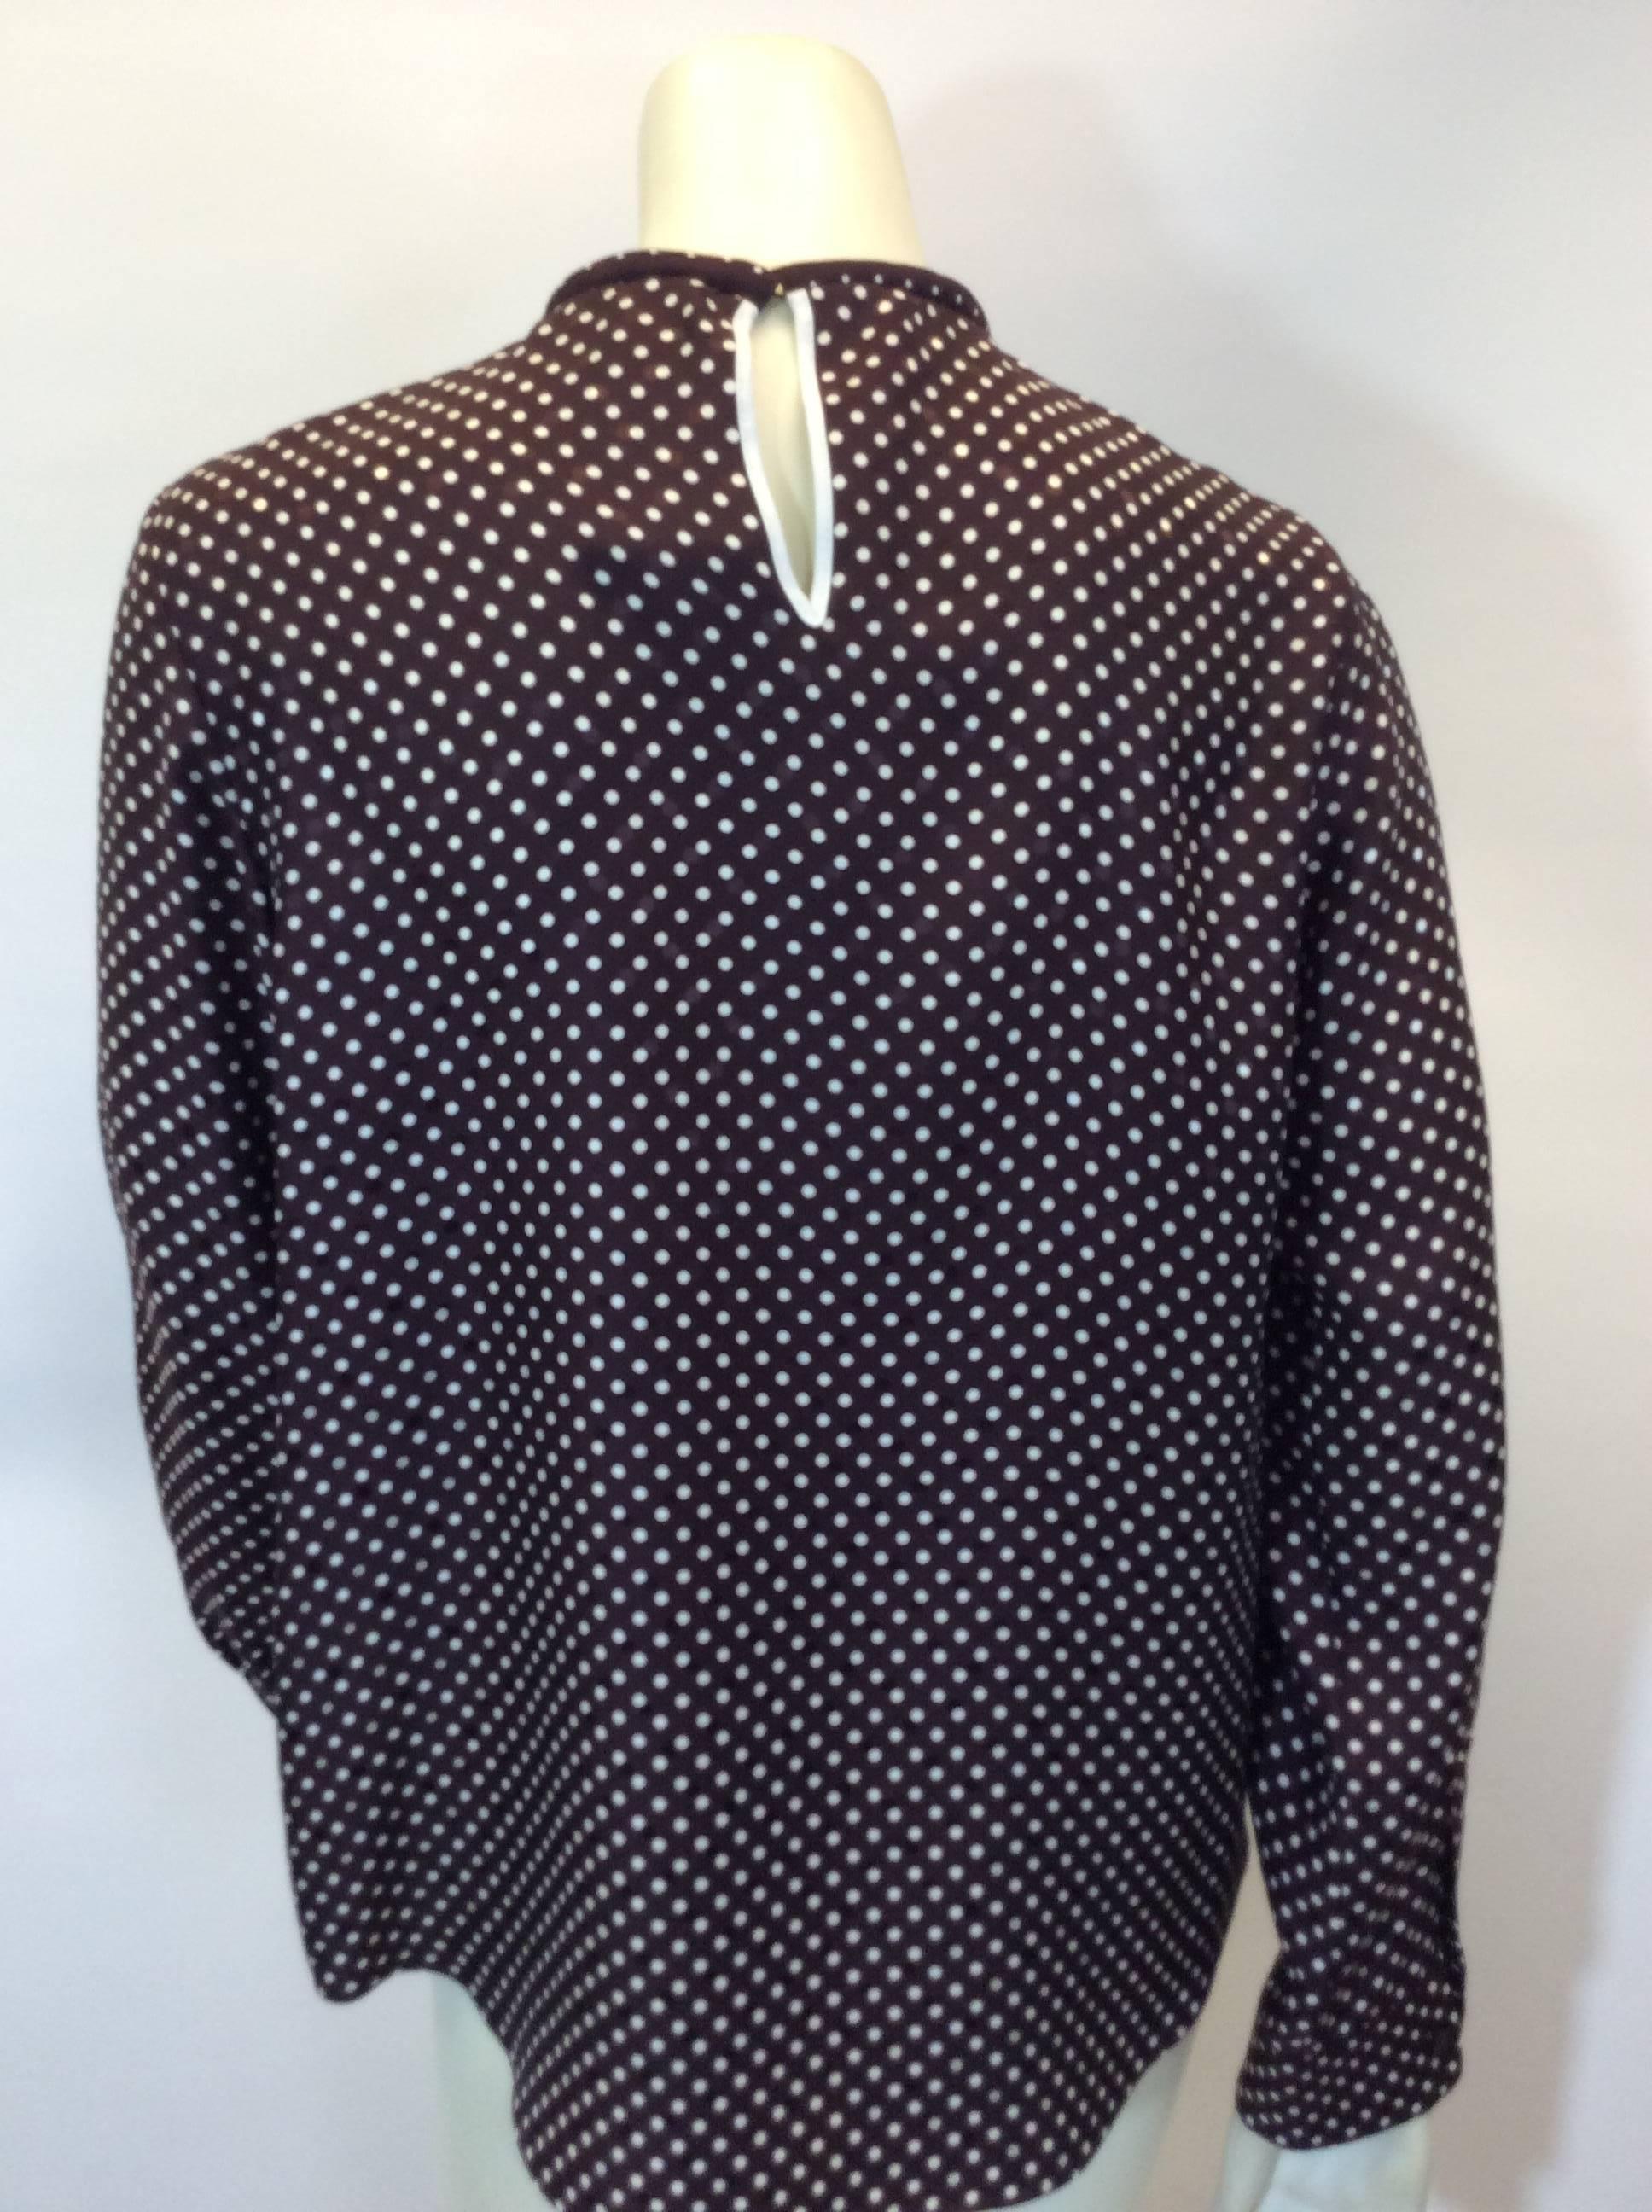 Chloe Brown Polka Dot Blouse with Neck Tie In Excellent Condition For Sale In Narberth, PA